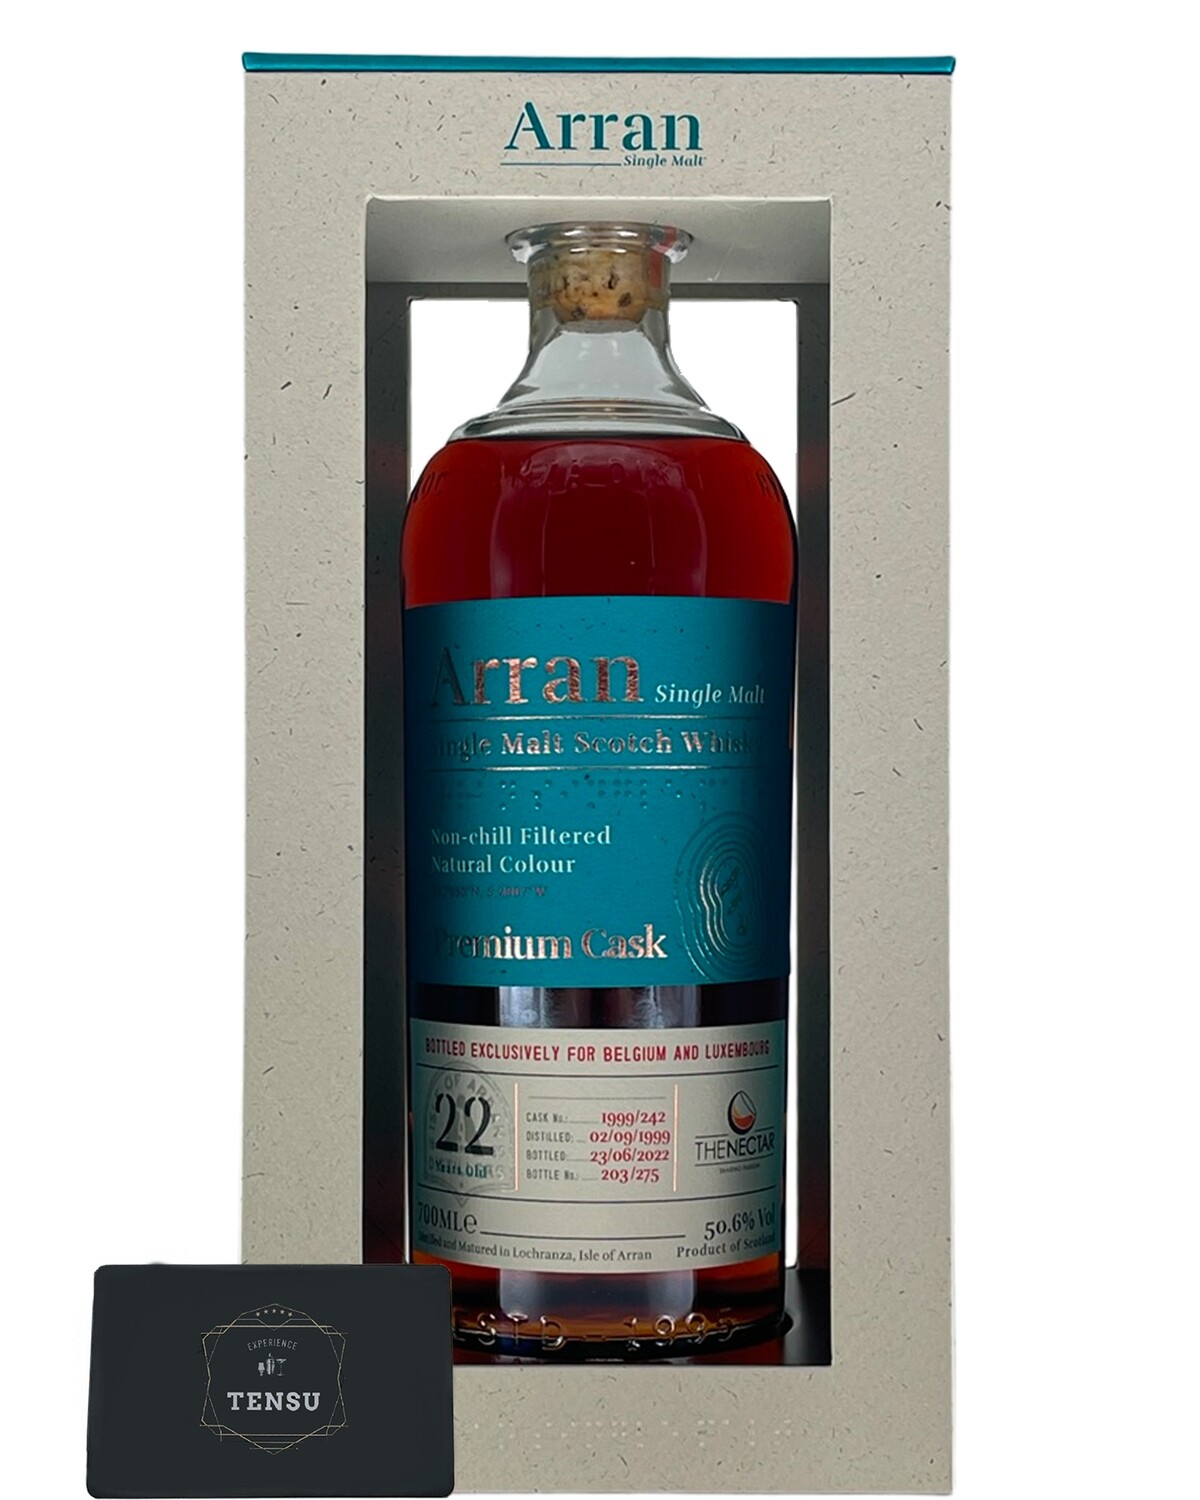 Arran 22 Years Old (1999) 50.6 Single Cask "For the Nectar"